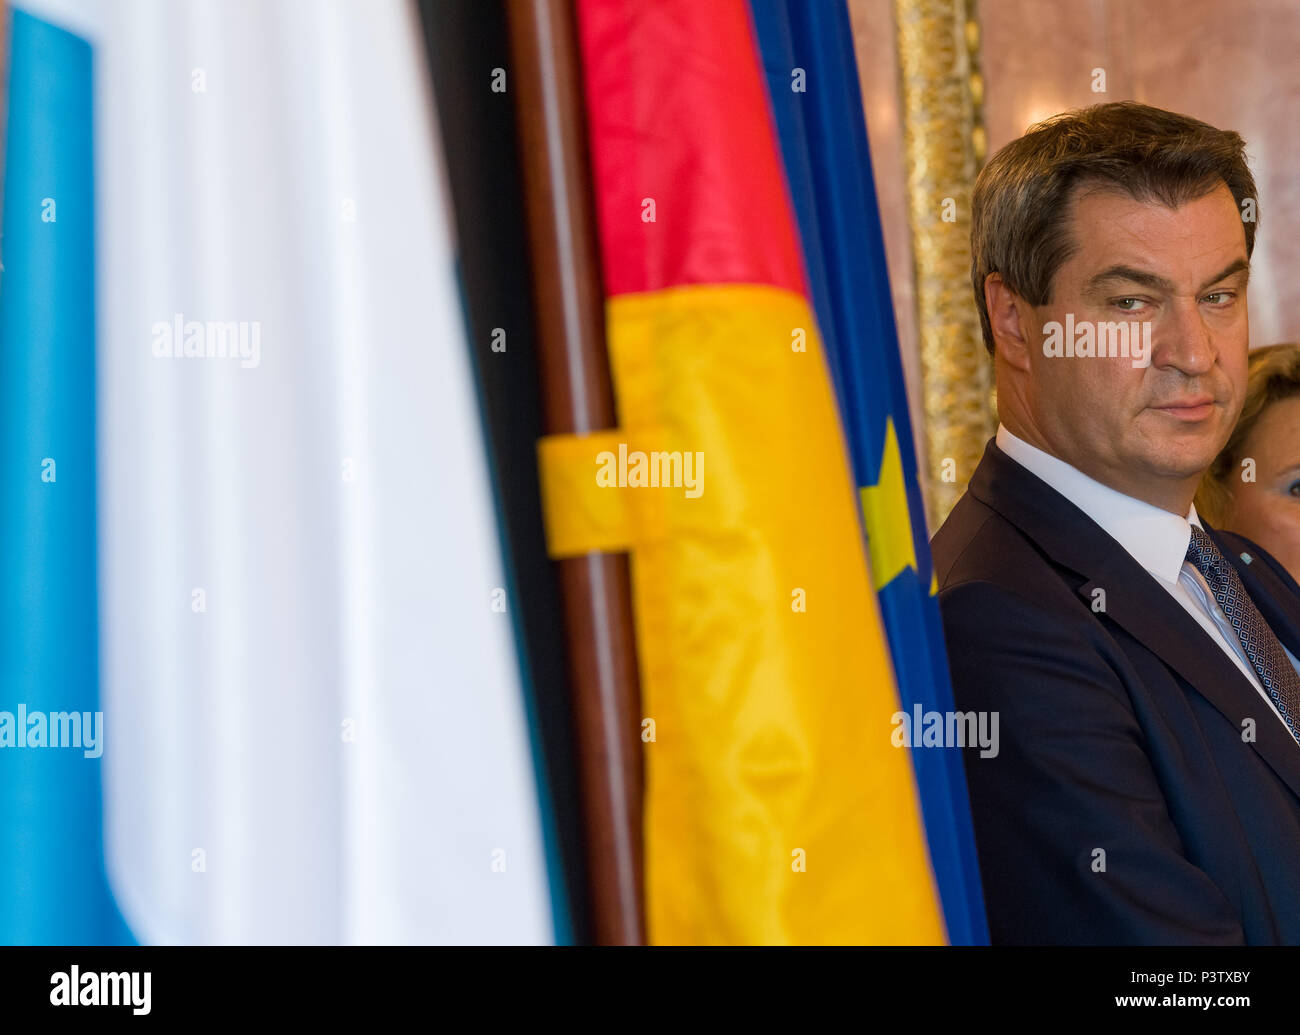 19 June 2018, Germany, Munich: Markus Soeder of the Christian Social Union (CSU), Premier of Bavaria, stands next to the Bavarian, German and European flag during the signing of the certificates of the 'Pakt fuer berufliche Weiterbildung 4.0' (lit. Pact for professional development 4.0). Photo: Peter Kneffel/dpa Stock Photo